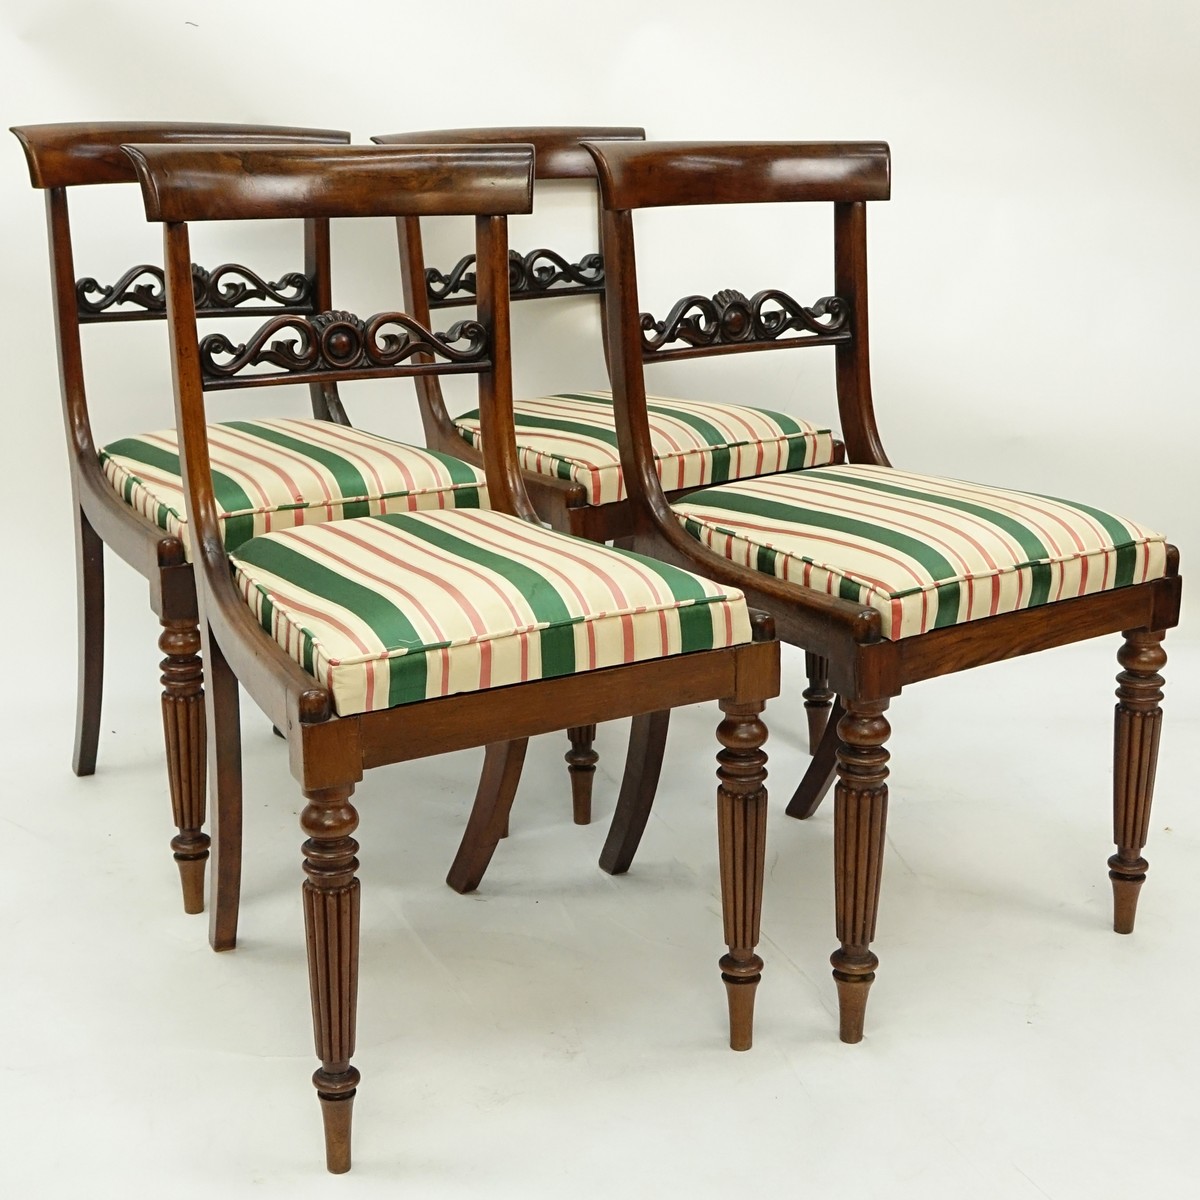 Set of Four (4) Antique English Regency style Carved Mahogany and Upholstered Side Chairs. Pierced splats and stands on tapered legs with molded front legs.